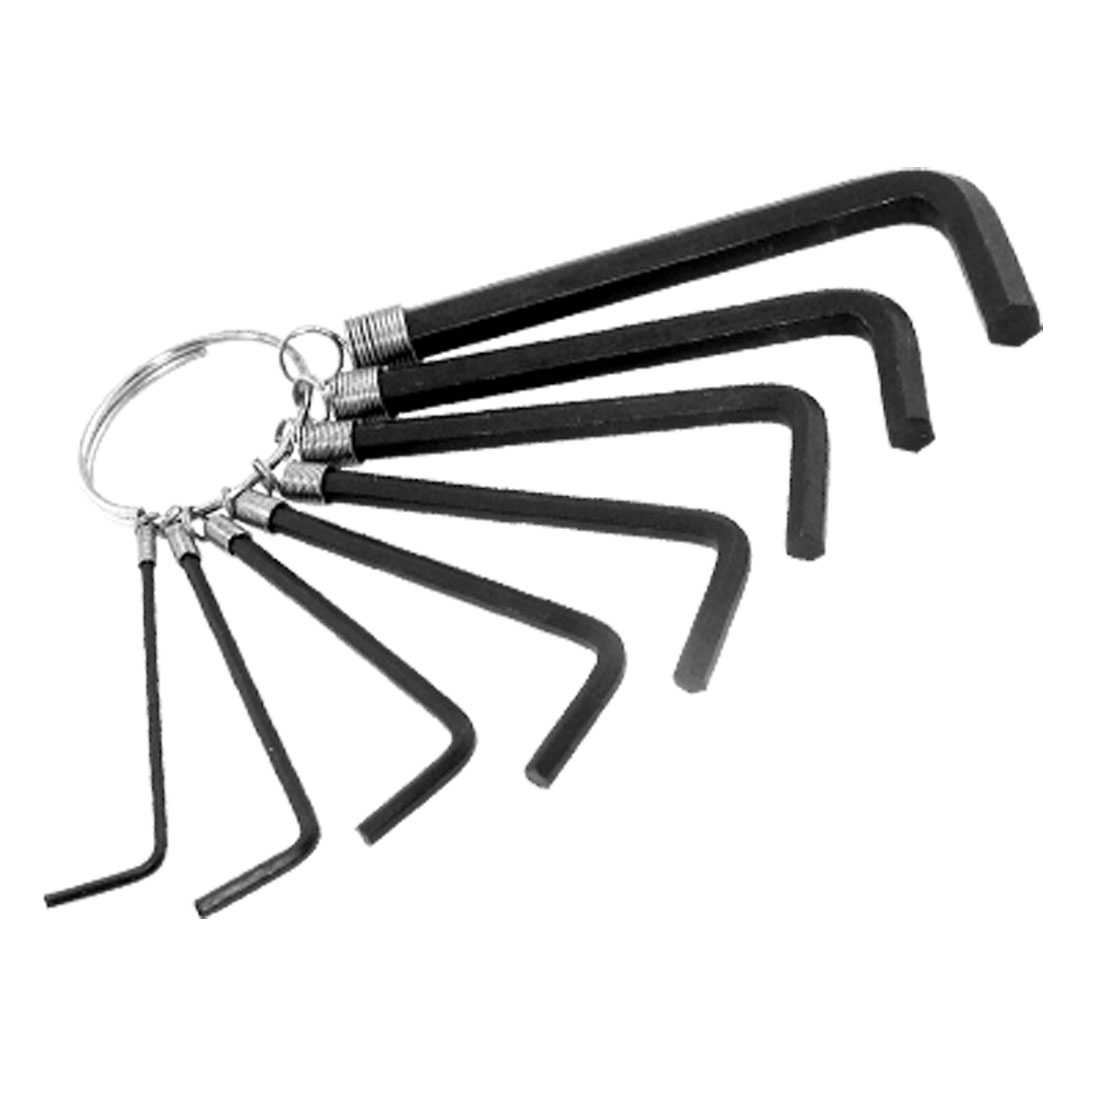 Unique Bargains 8 In 1 Set Portable Hex Head Wrench 1.5mm~6mm Metric Key Chain